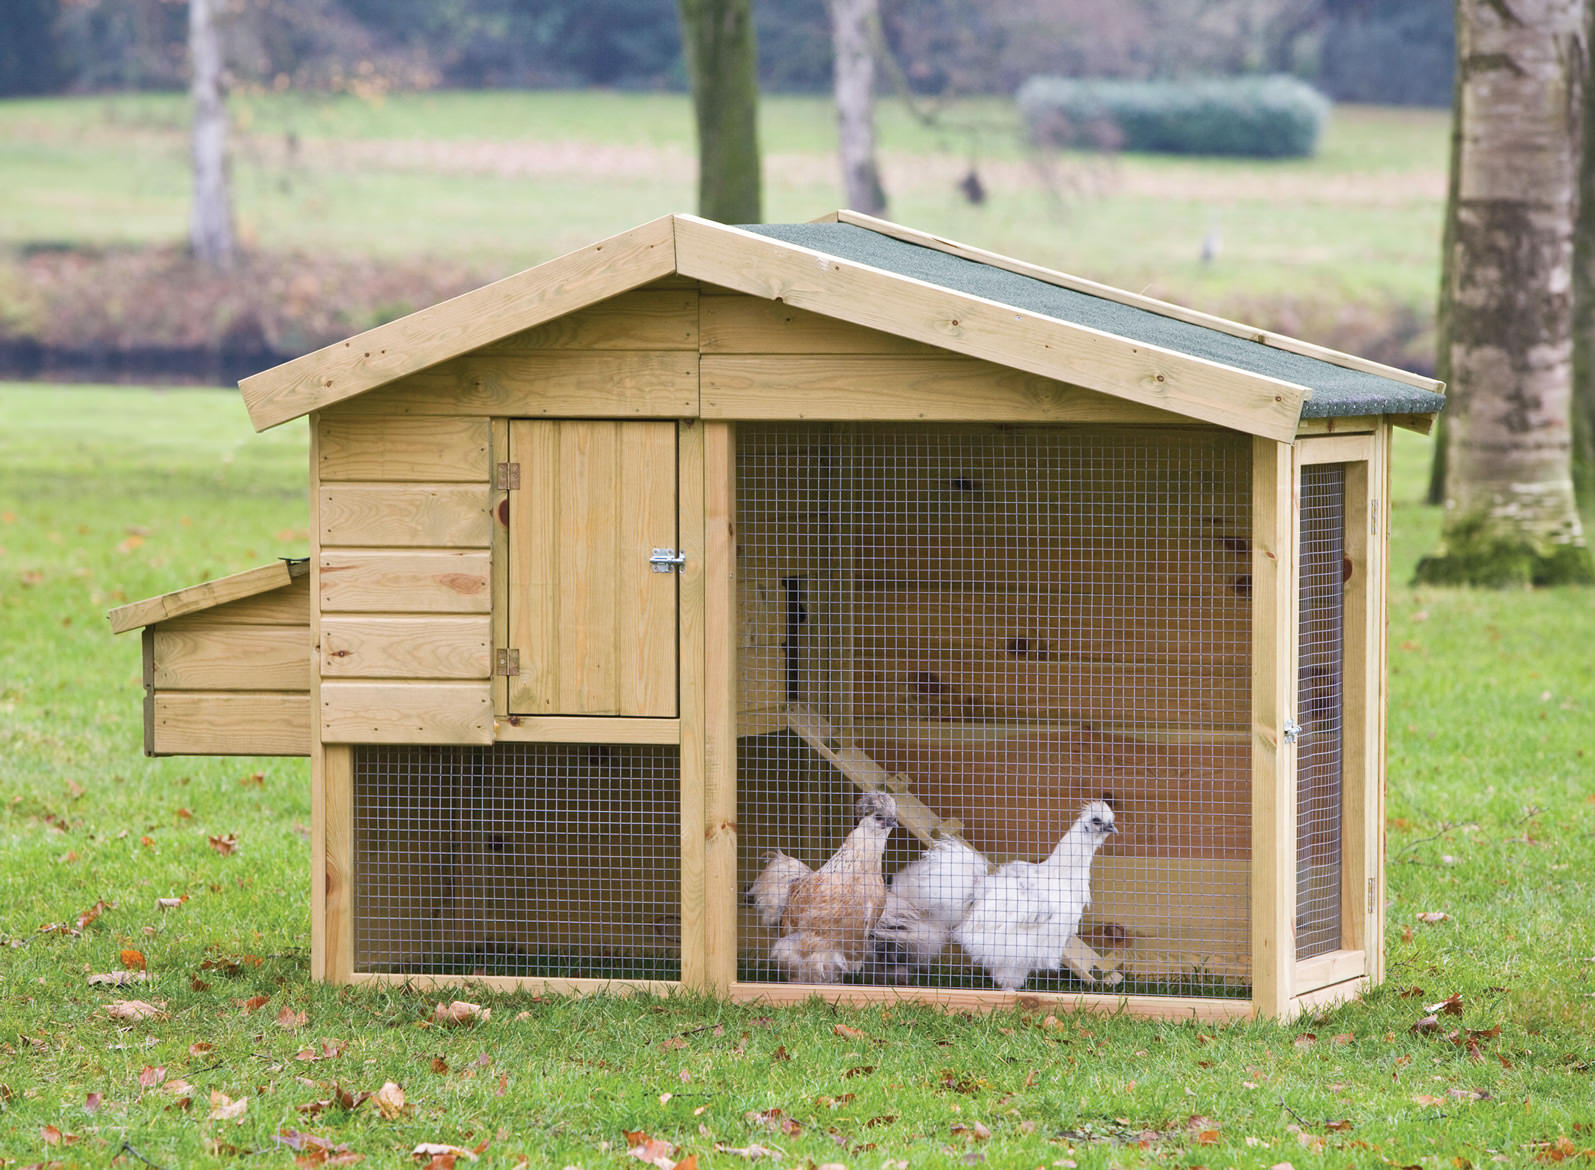 How To Build A Chicken Coop Instructions - How To BuilD Your Own Chicken Coop Chicken Coop Designs For 10 Chickens